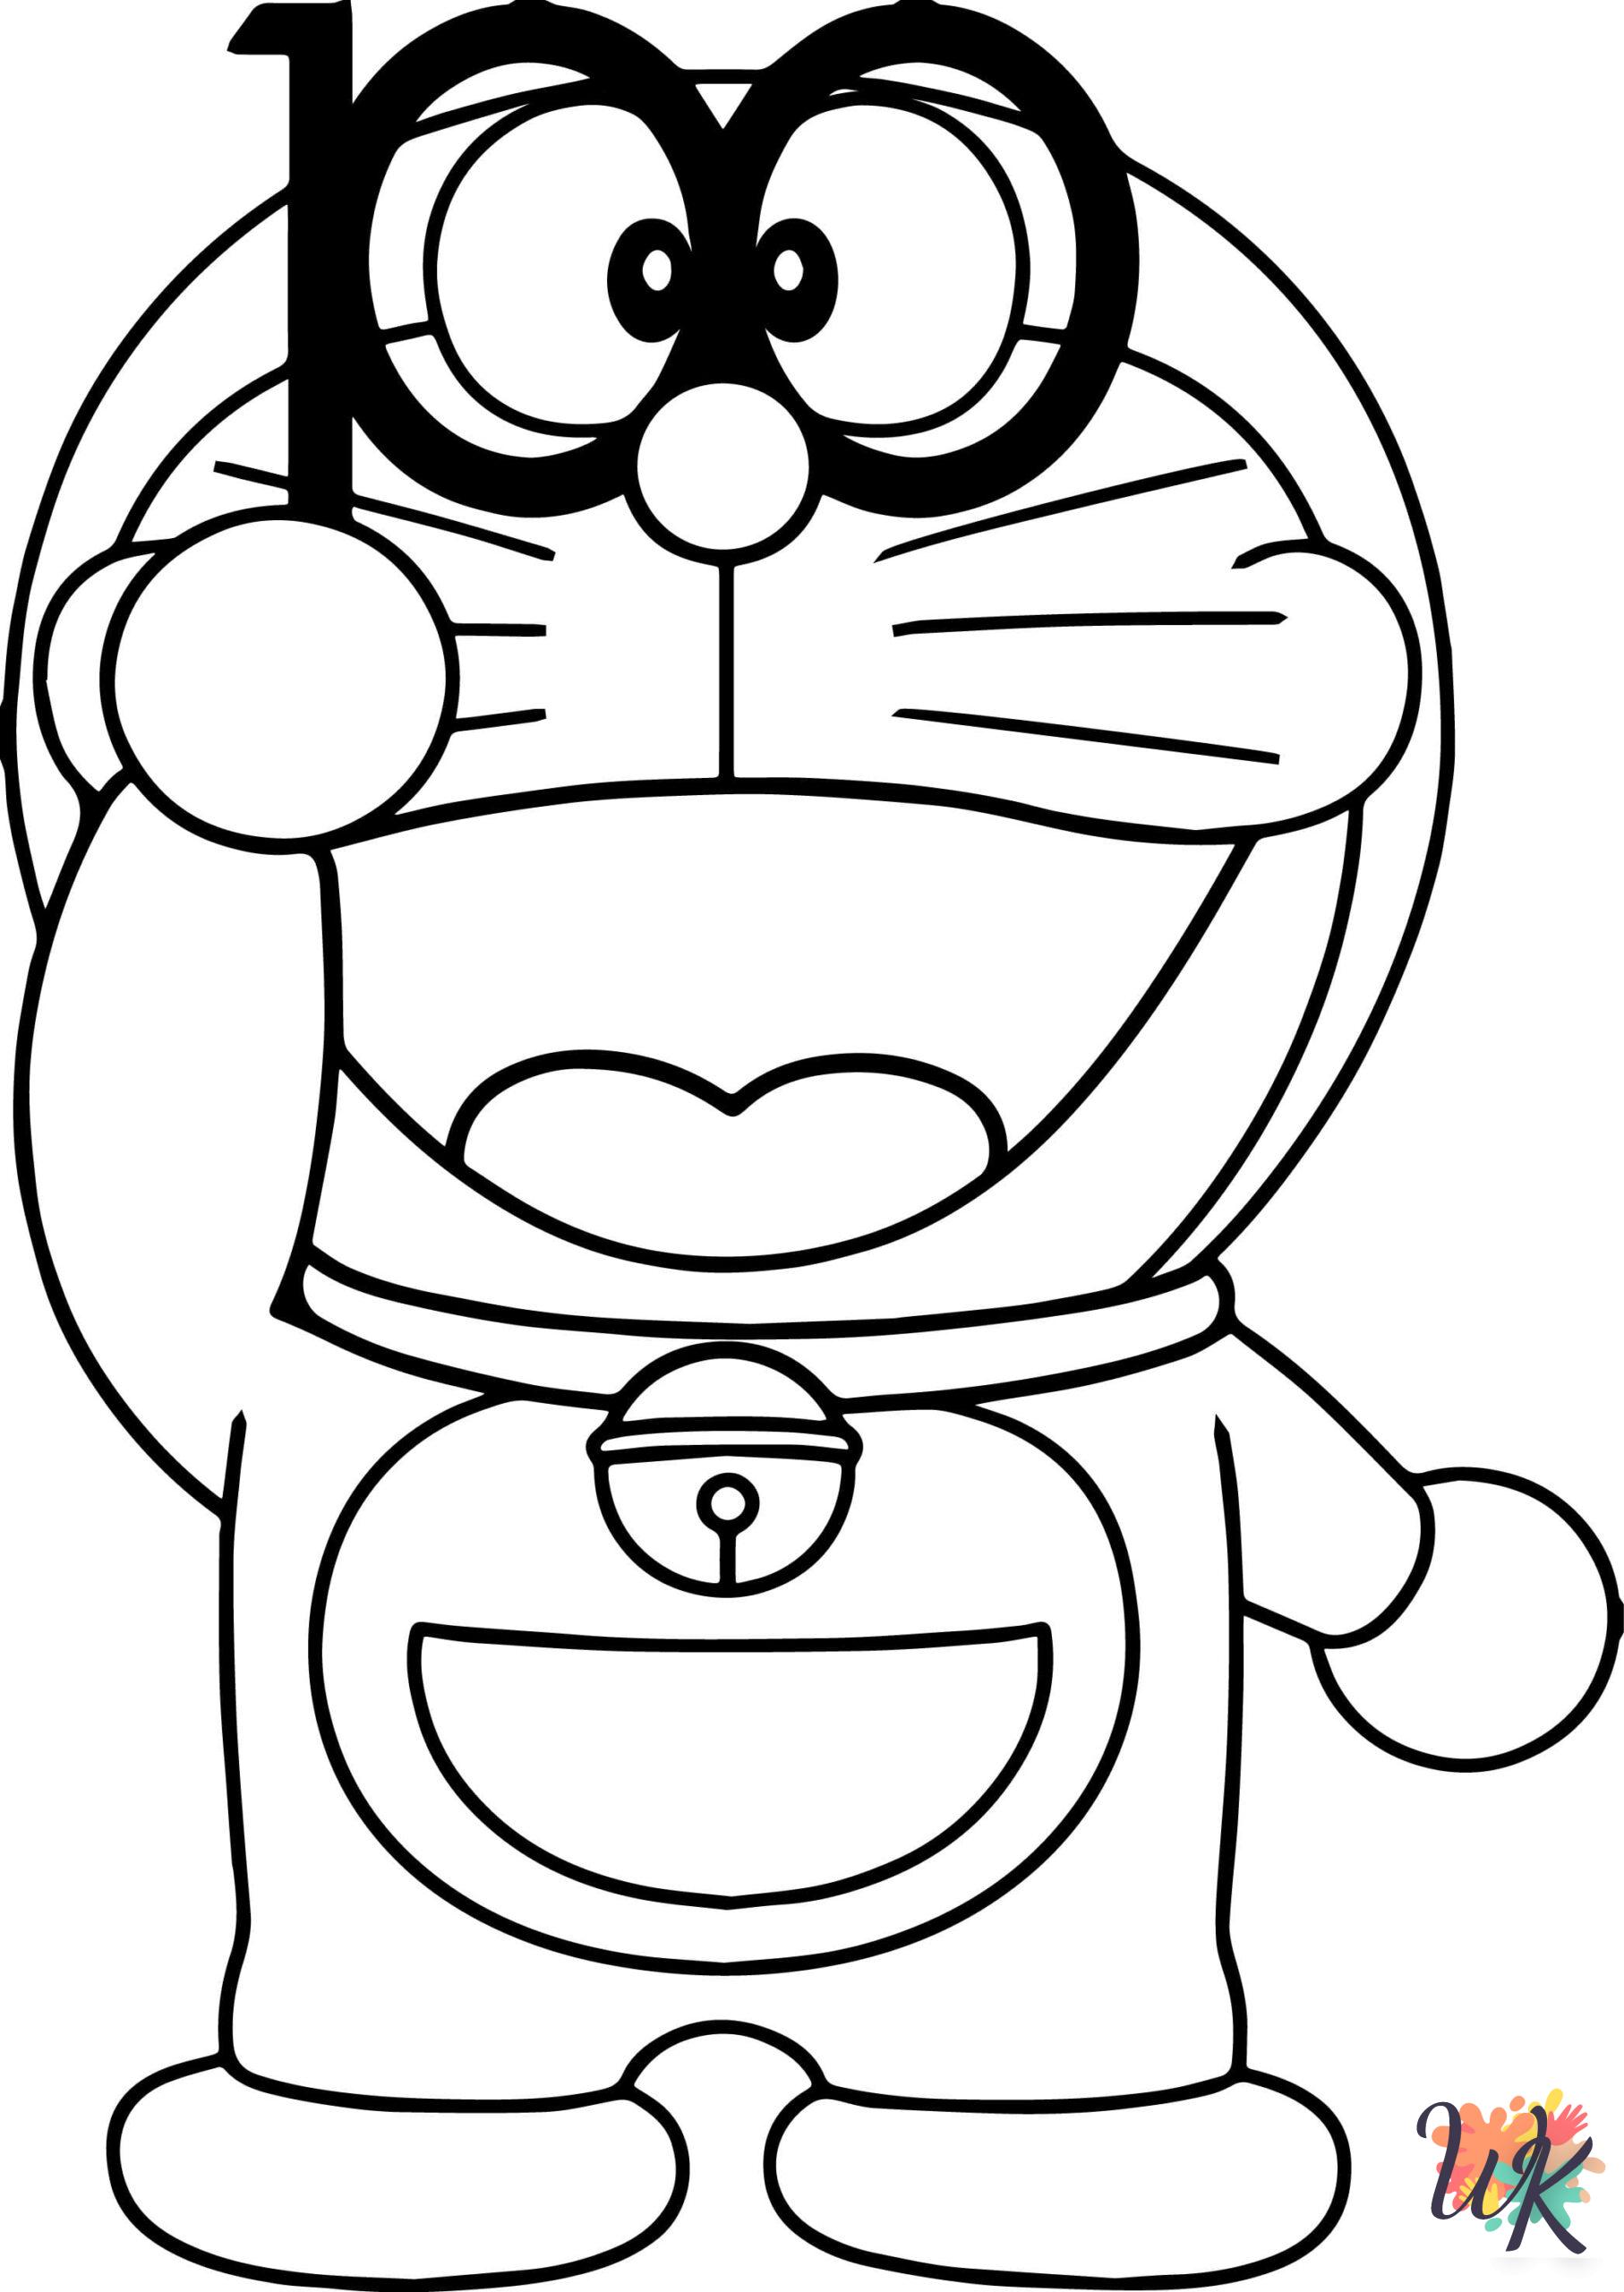 free full size printable Doraemon coloring pages for adults pdf